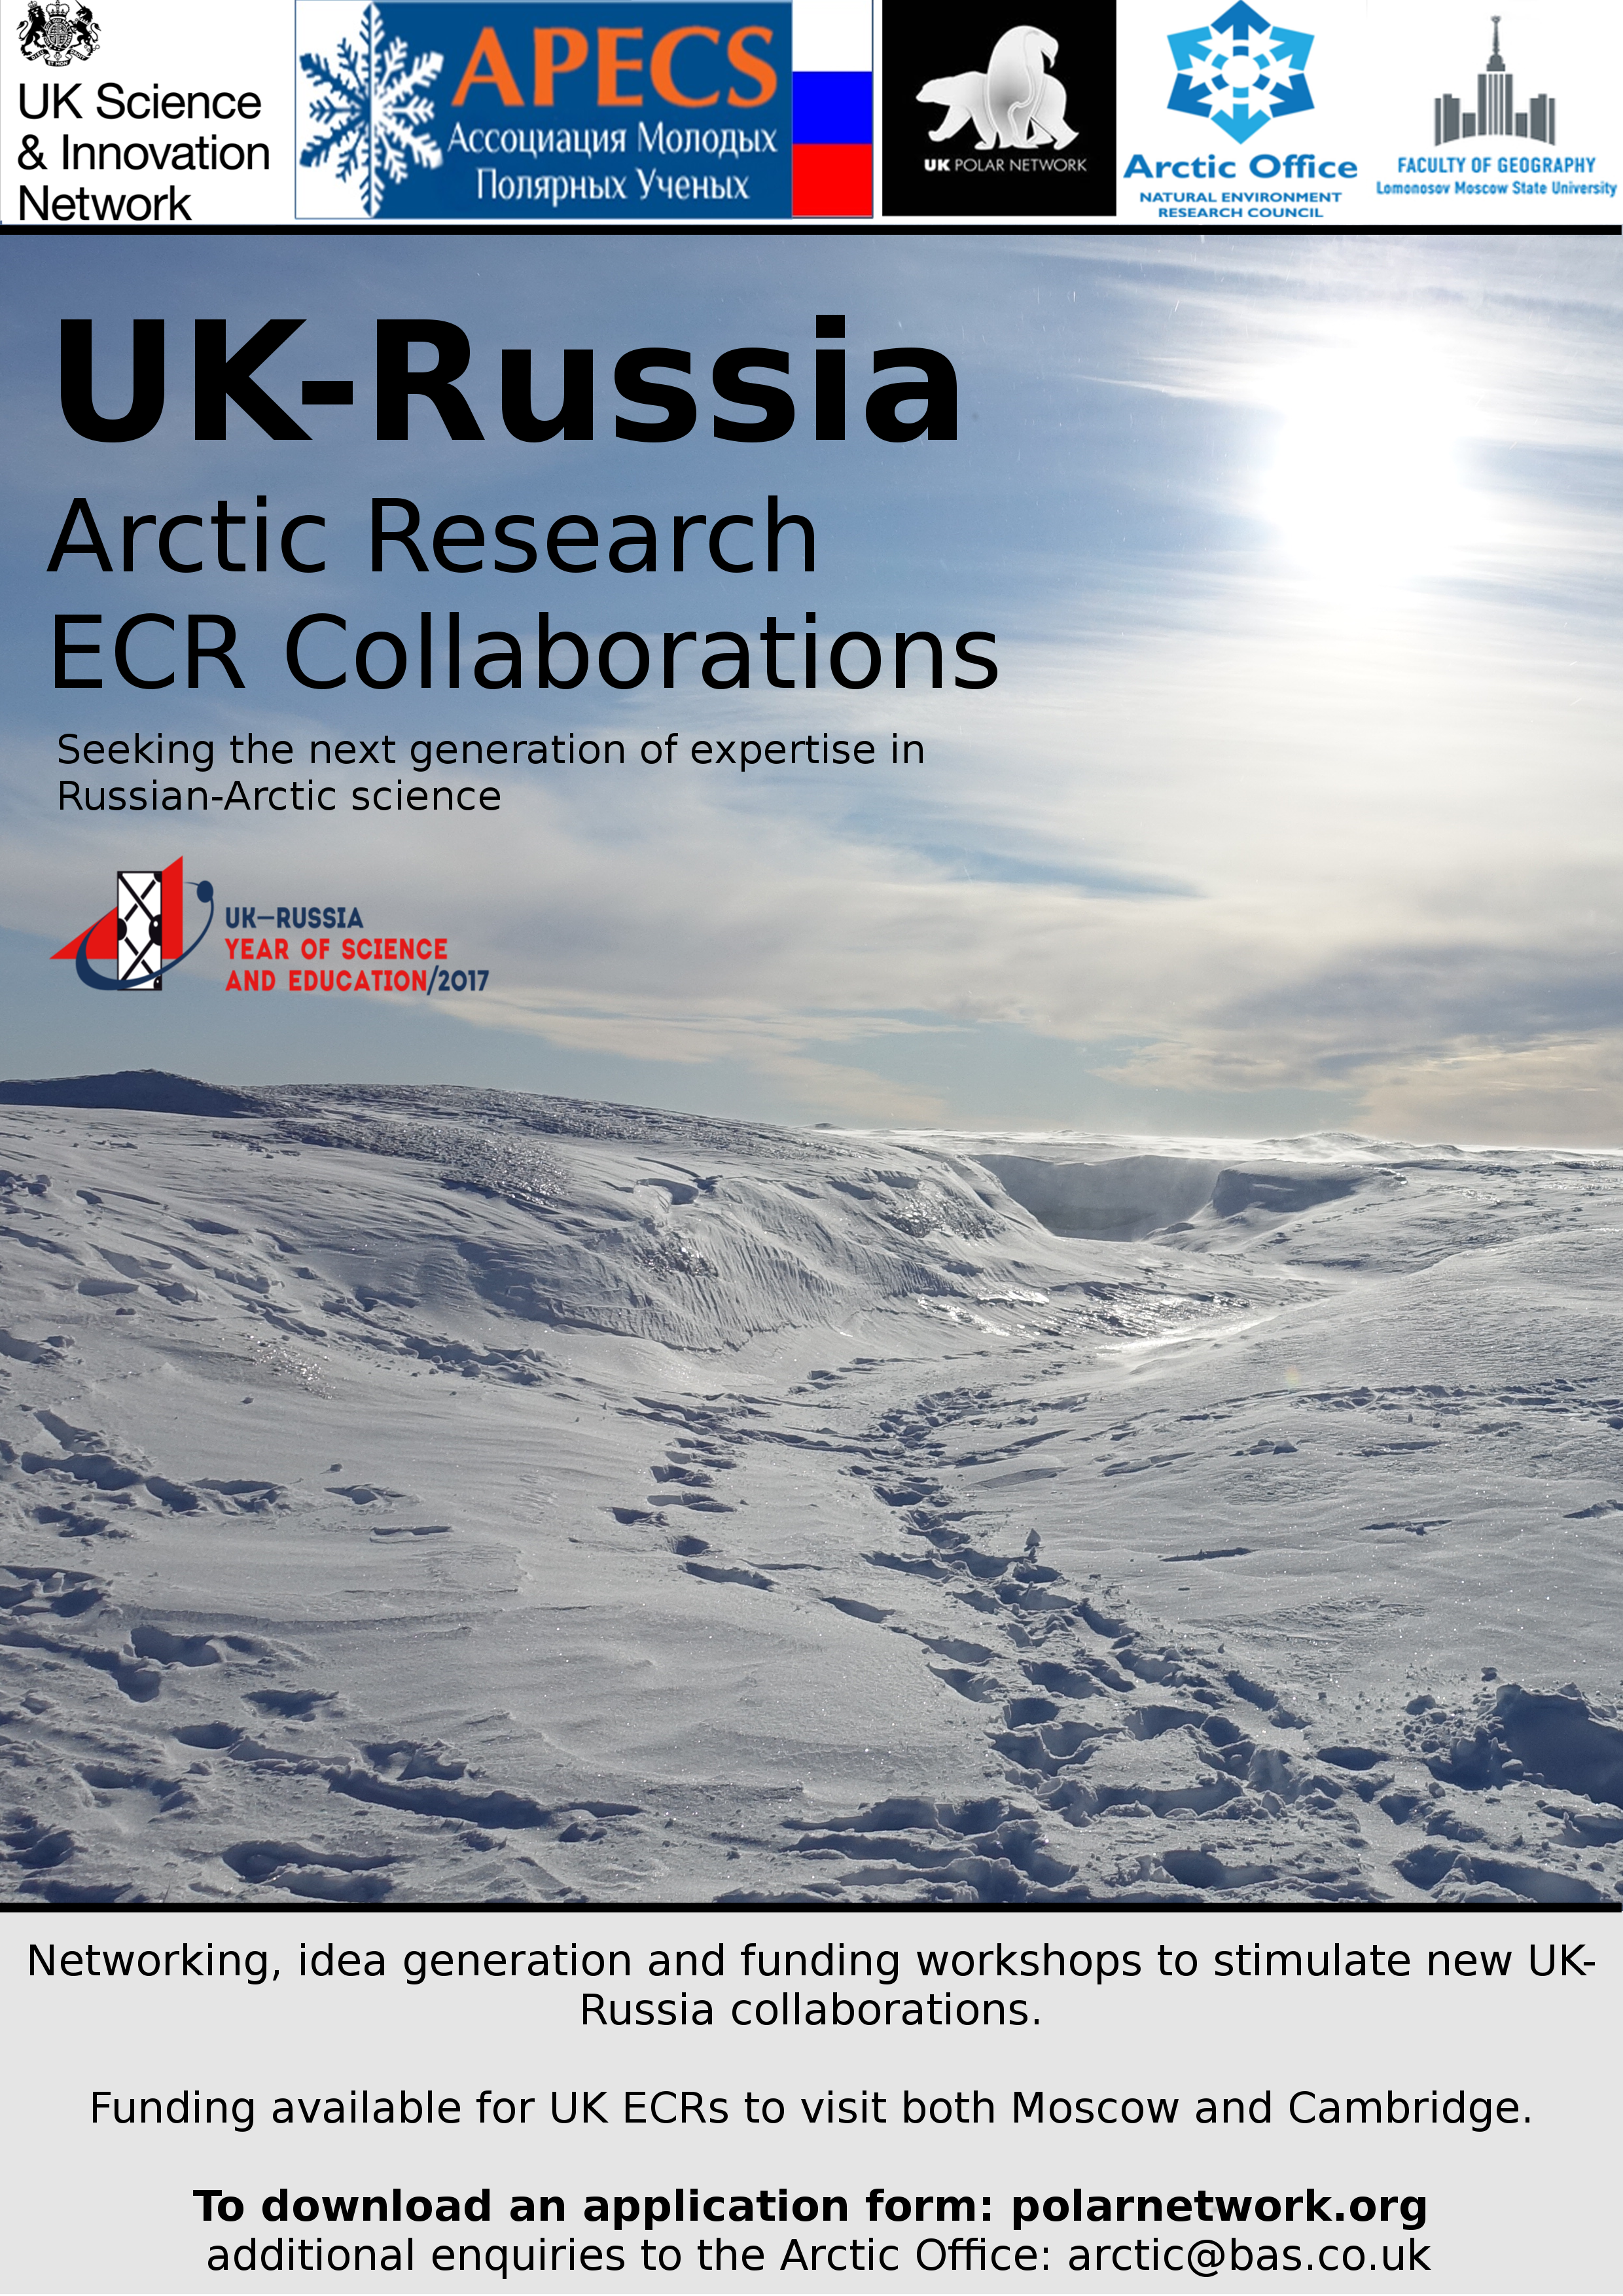 NERC_UKRussia_Flyer_02 (1).png